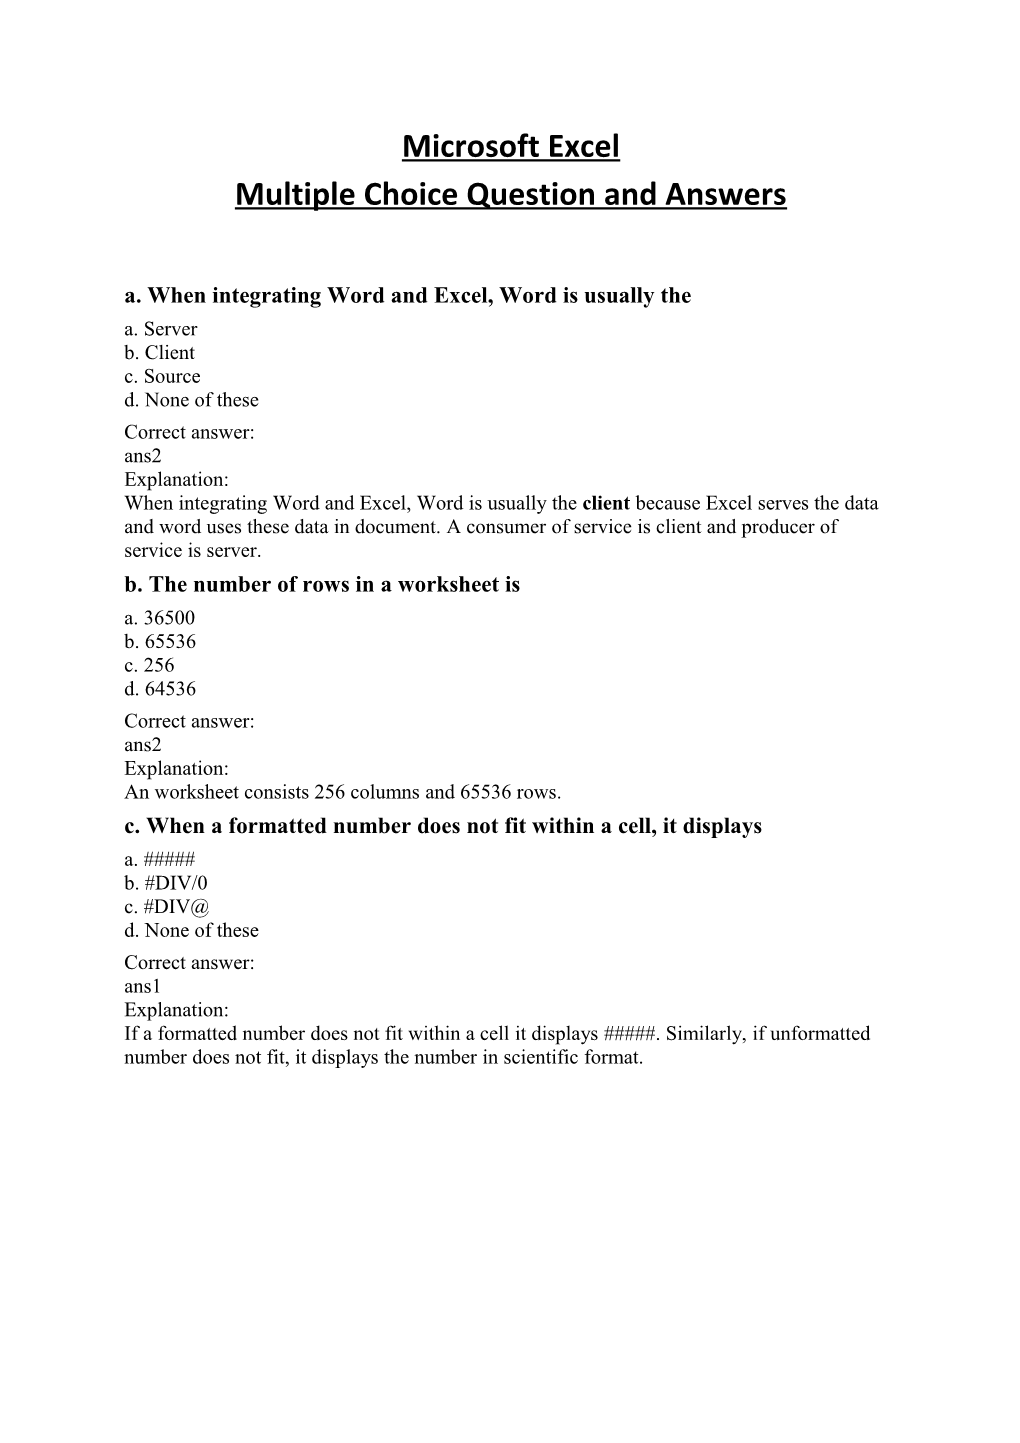 A. When Integrating Word and Excel, Word Is Usually The